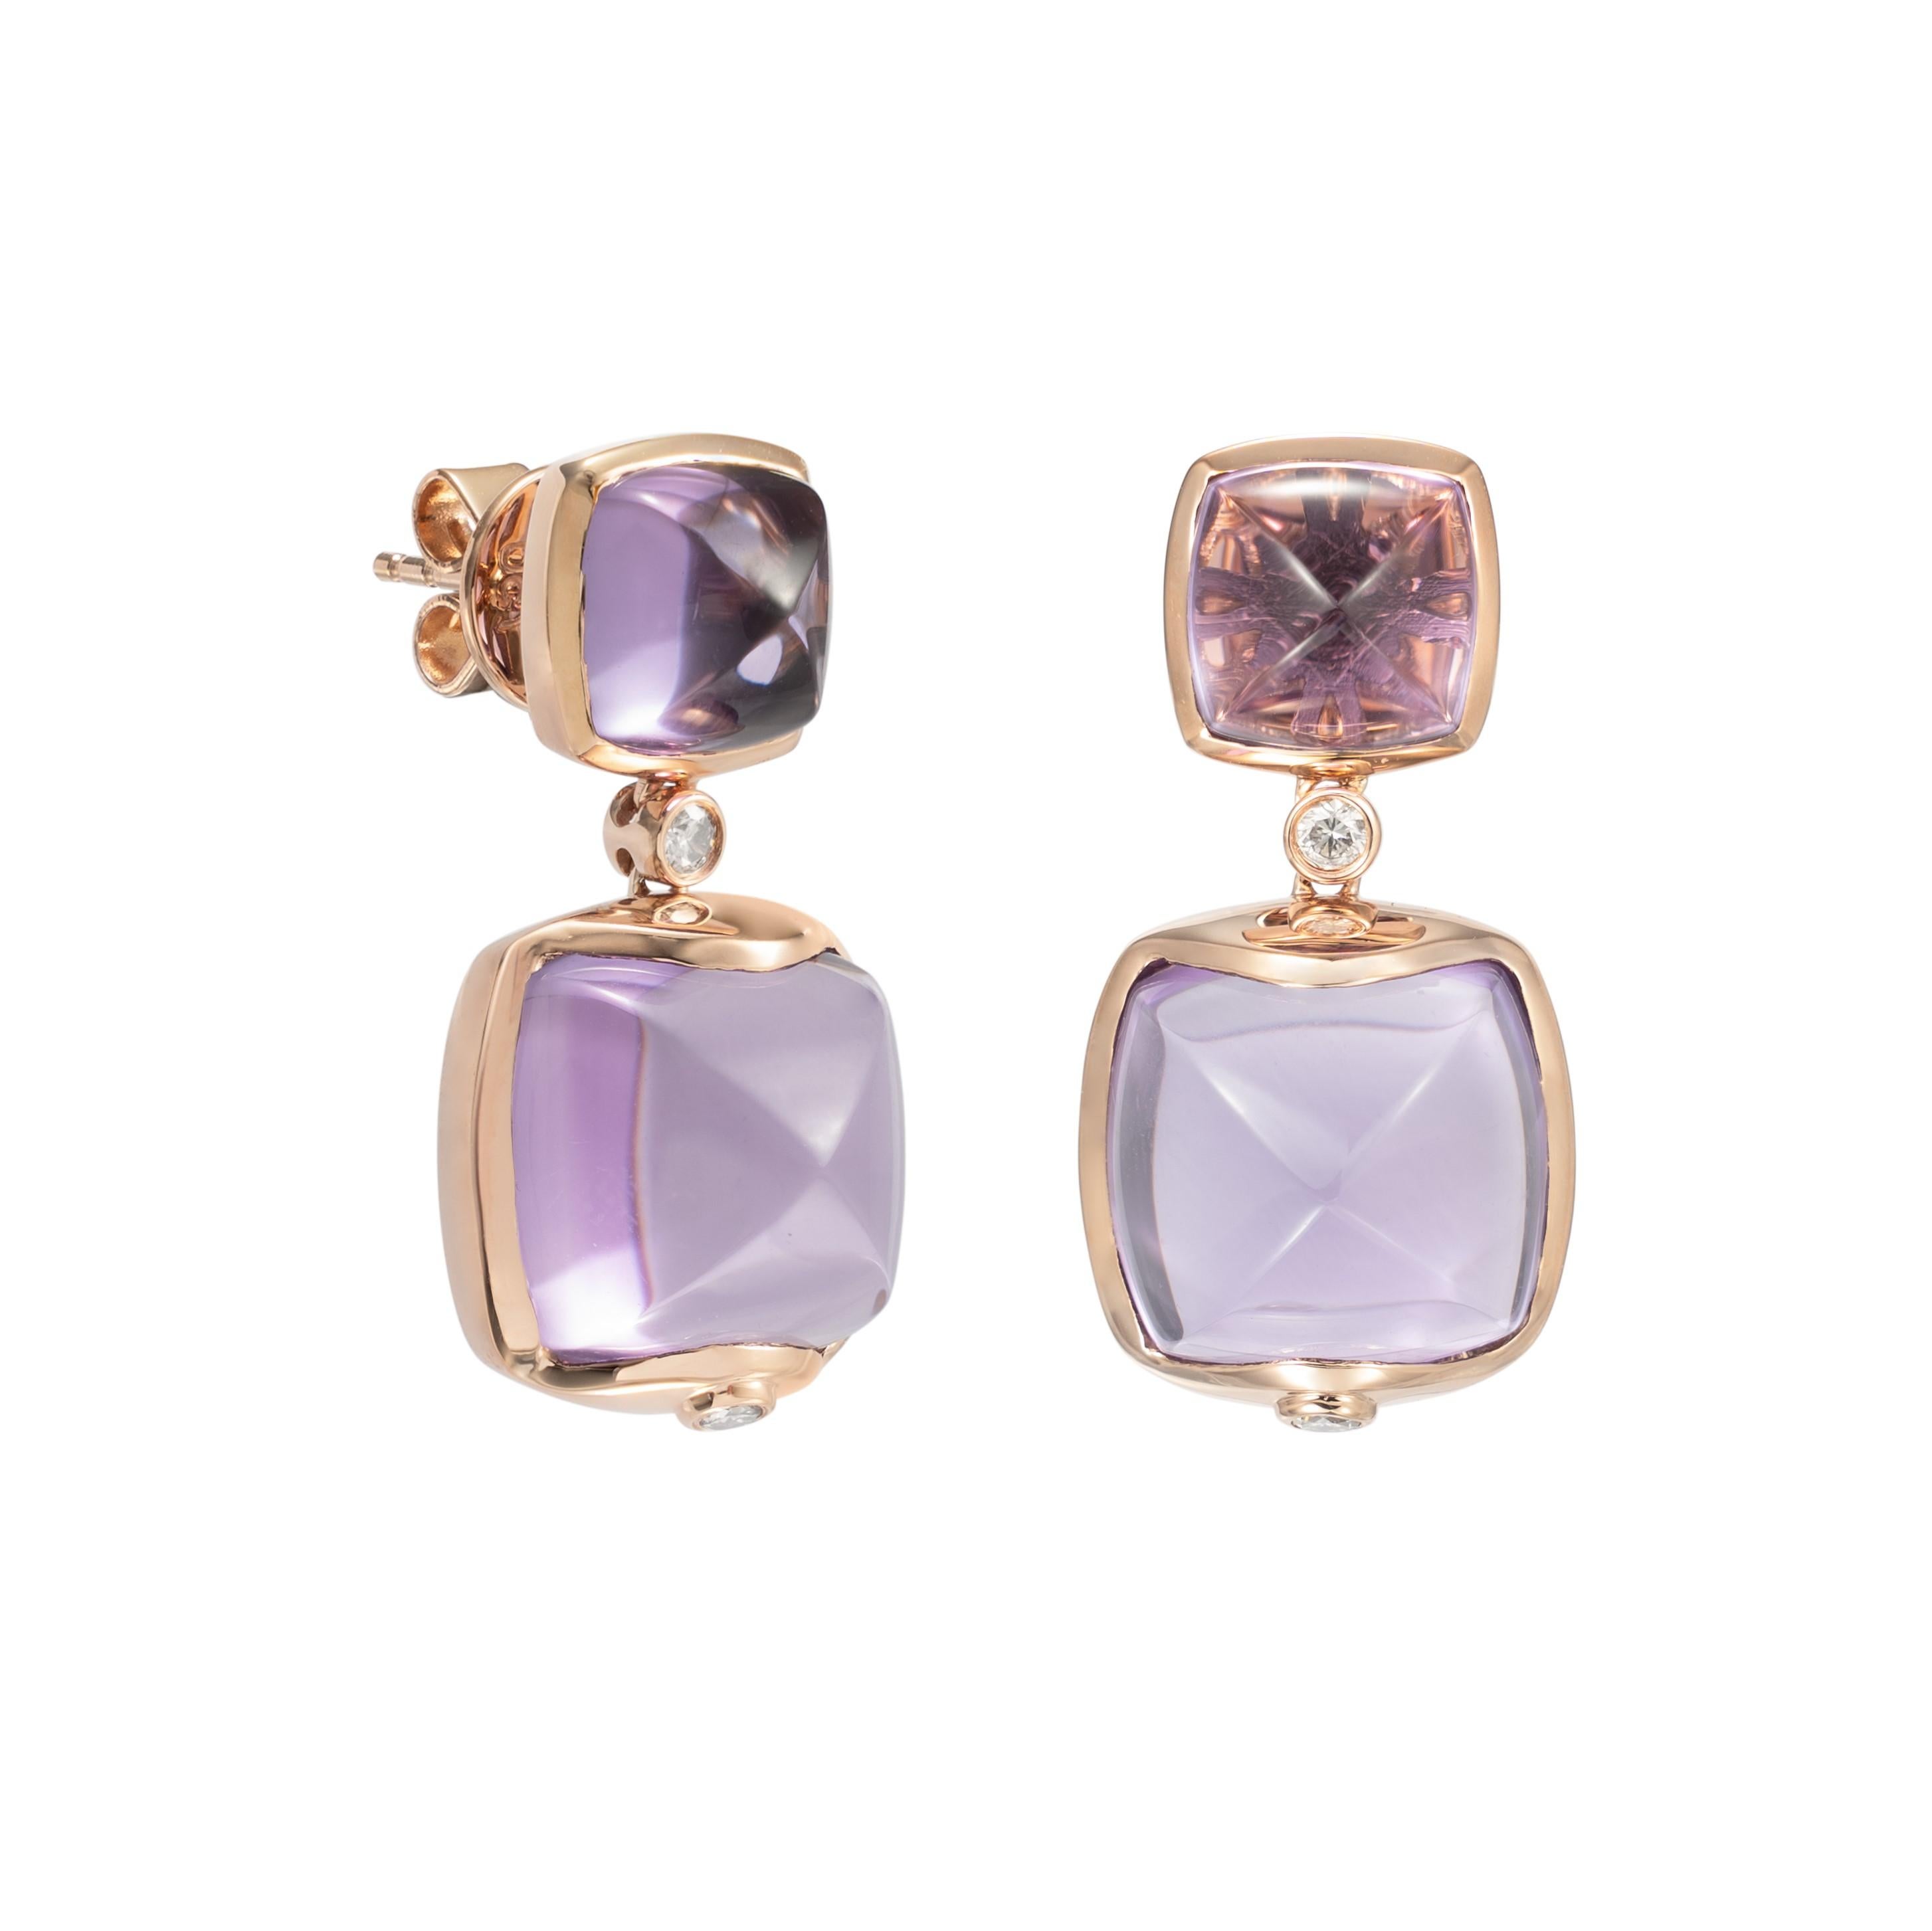 Contemporary Amethyst Sugarloaf Earrings with Diamond in 18 Karat Rose Gold